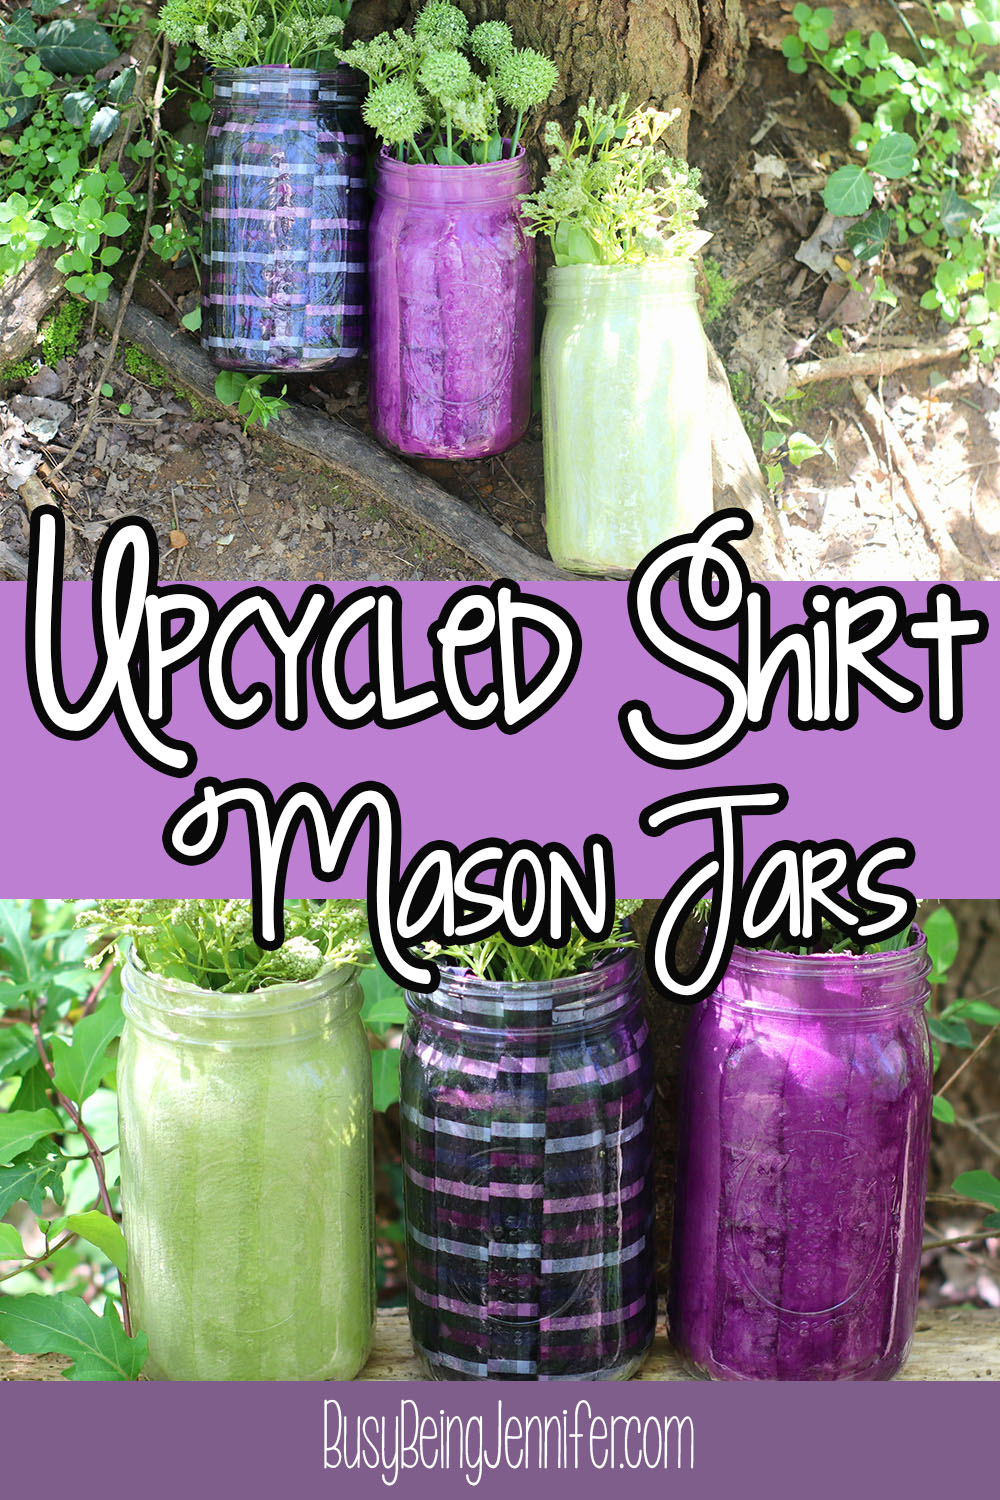 I made these awesome Upcycled Mason Jars with old shirts on a whim, because I have an enormous number of jars and really needed to brighten my porch. So, rather than just grabbing some plants, I decided to make a set of unique planters that are totally all my own!